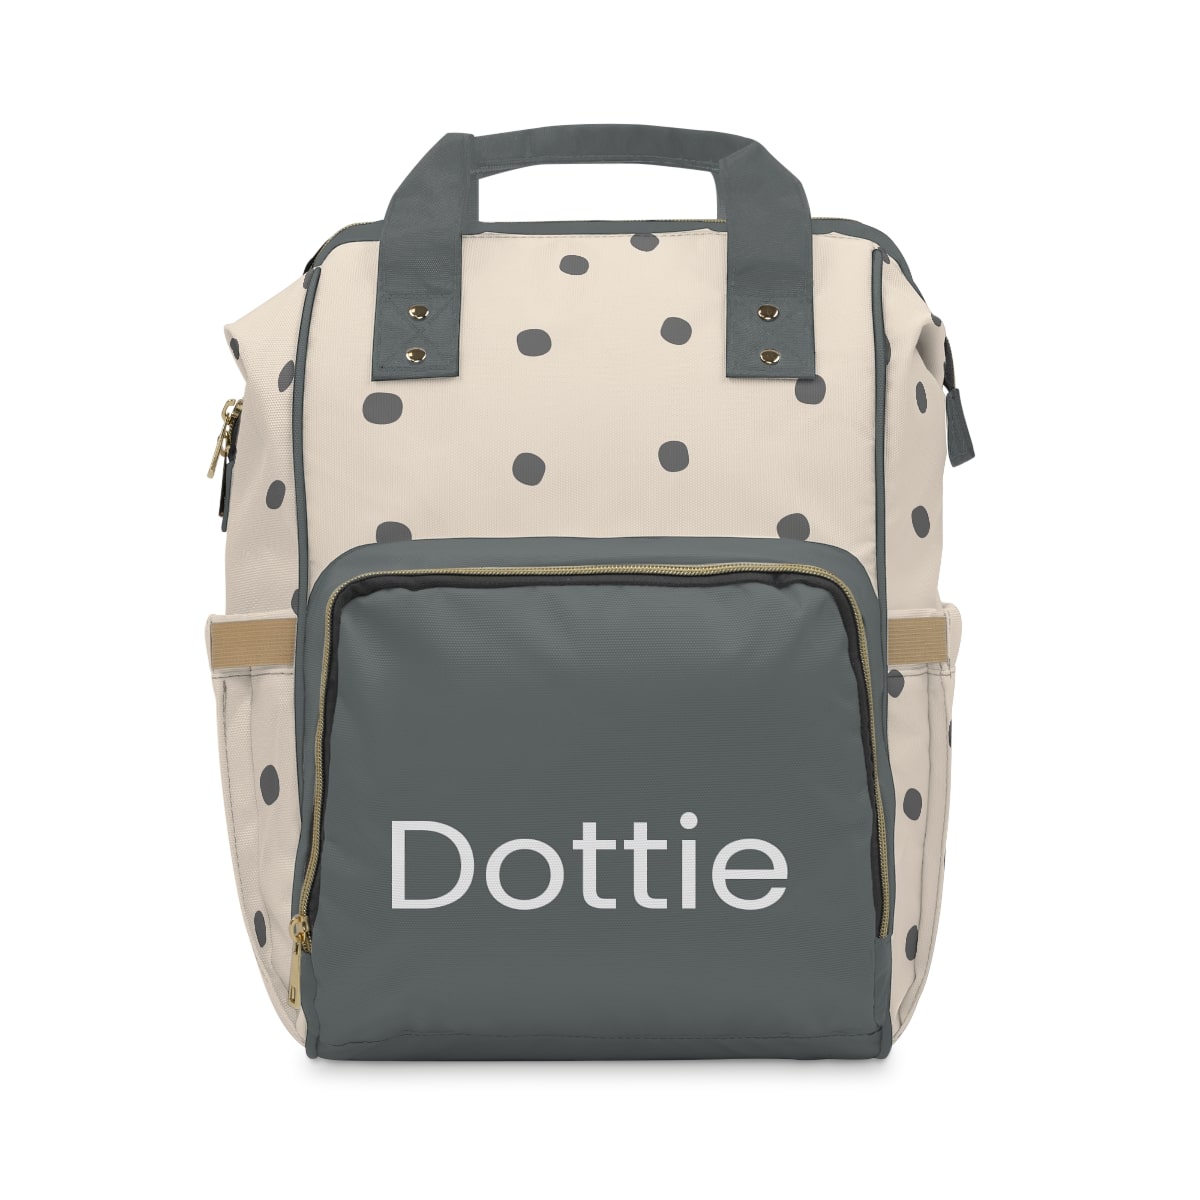 Dottie Knappie - personalised nappy bags